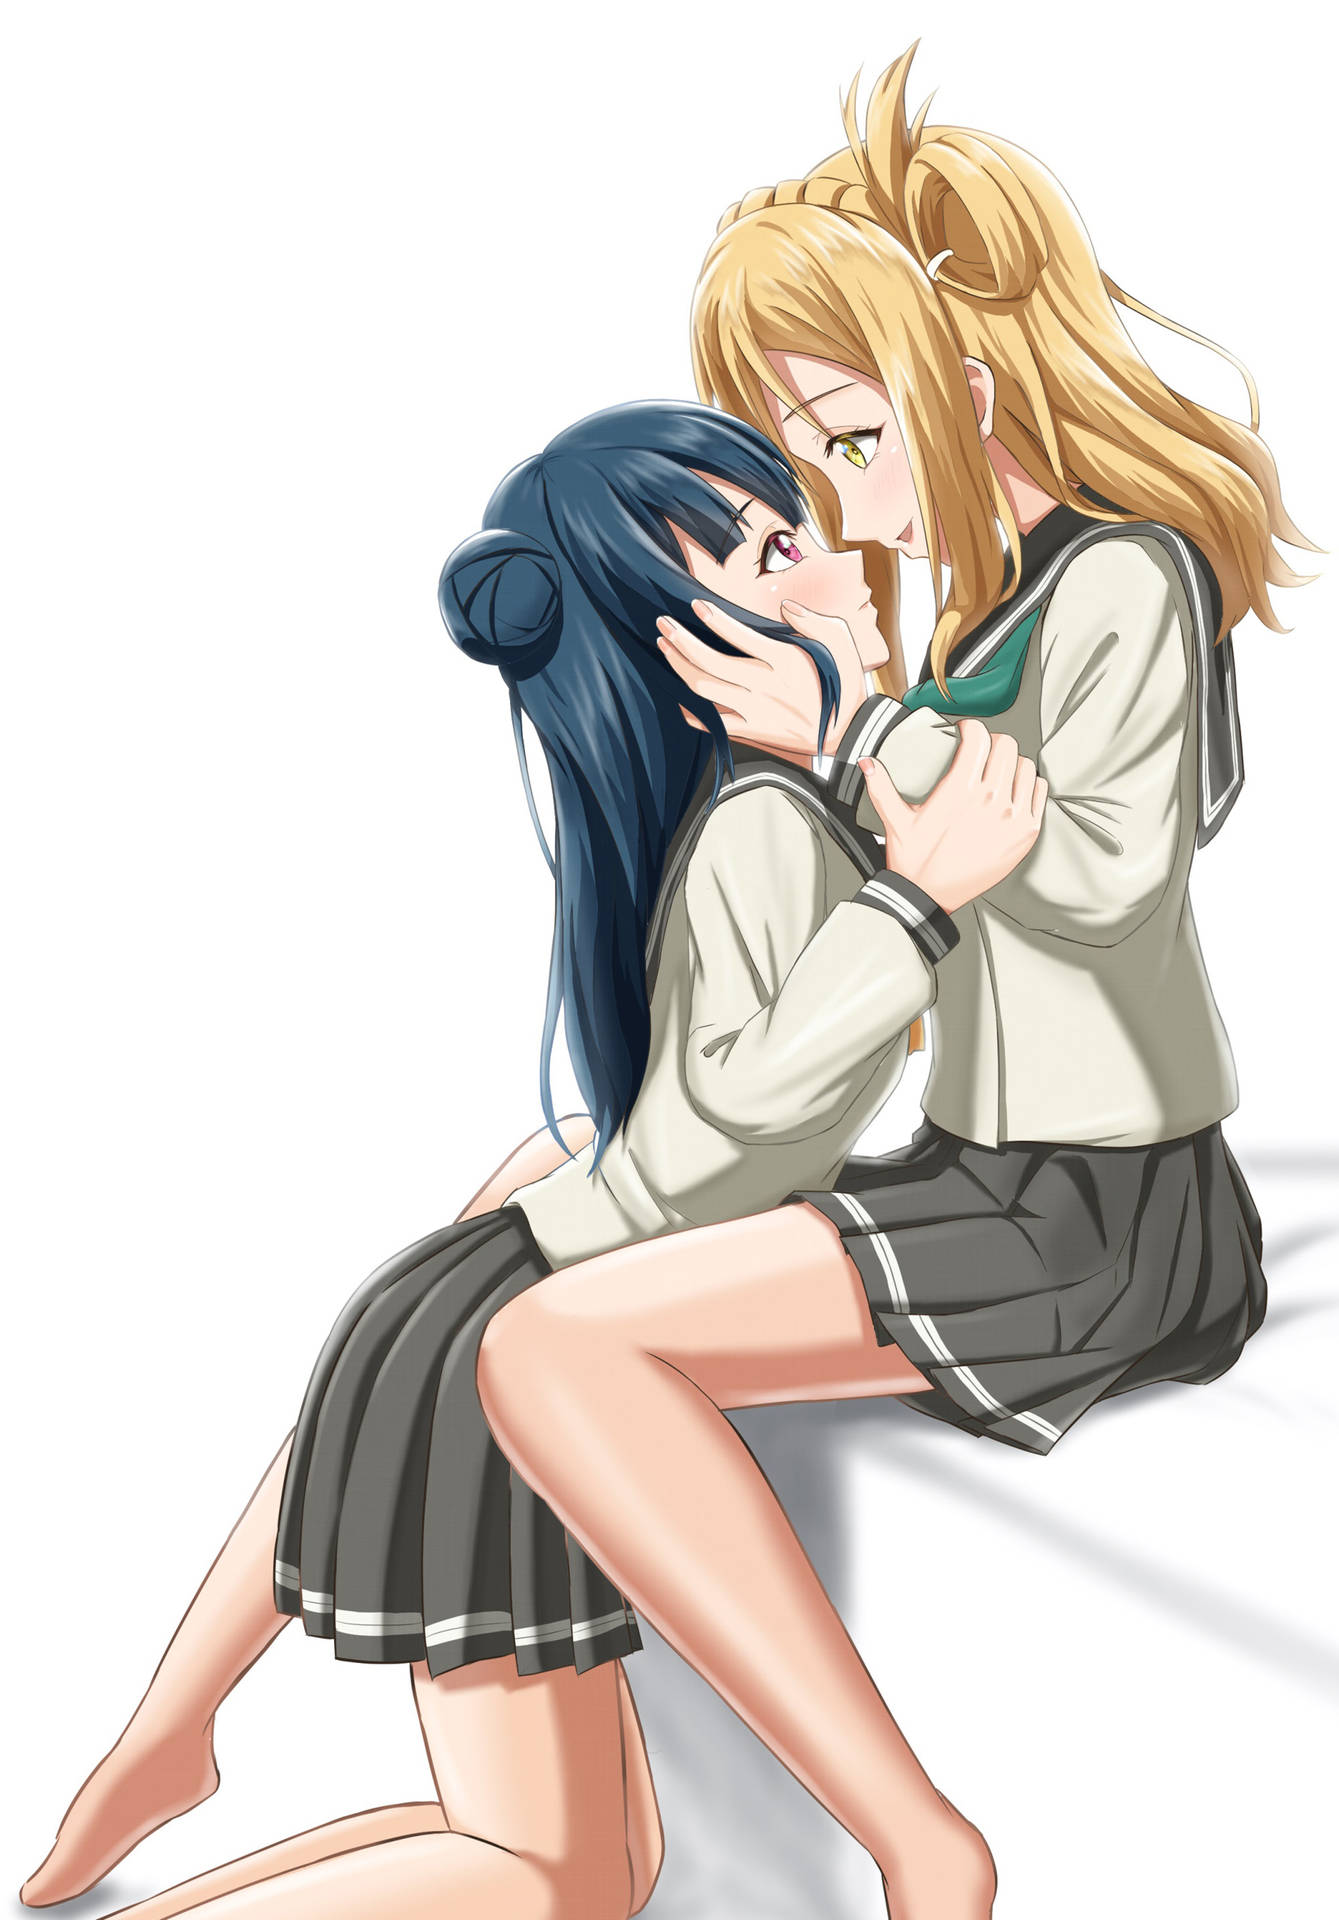 Amorous Anime Lesbian Couple Picture